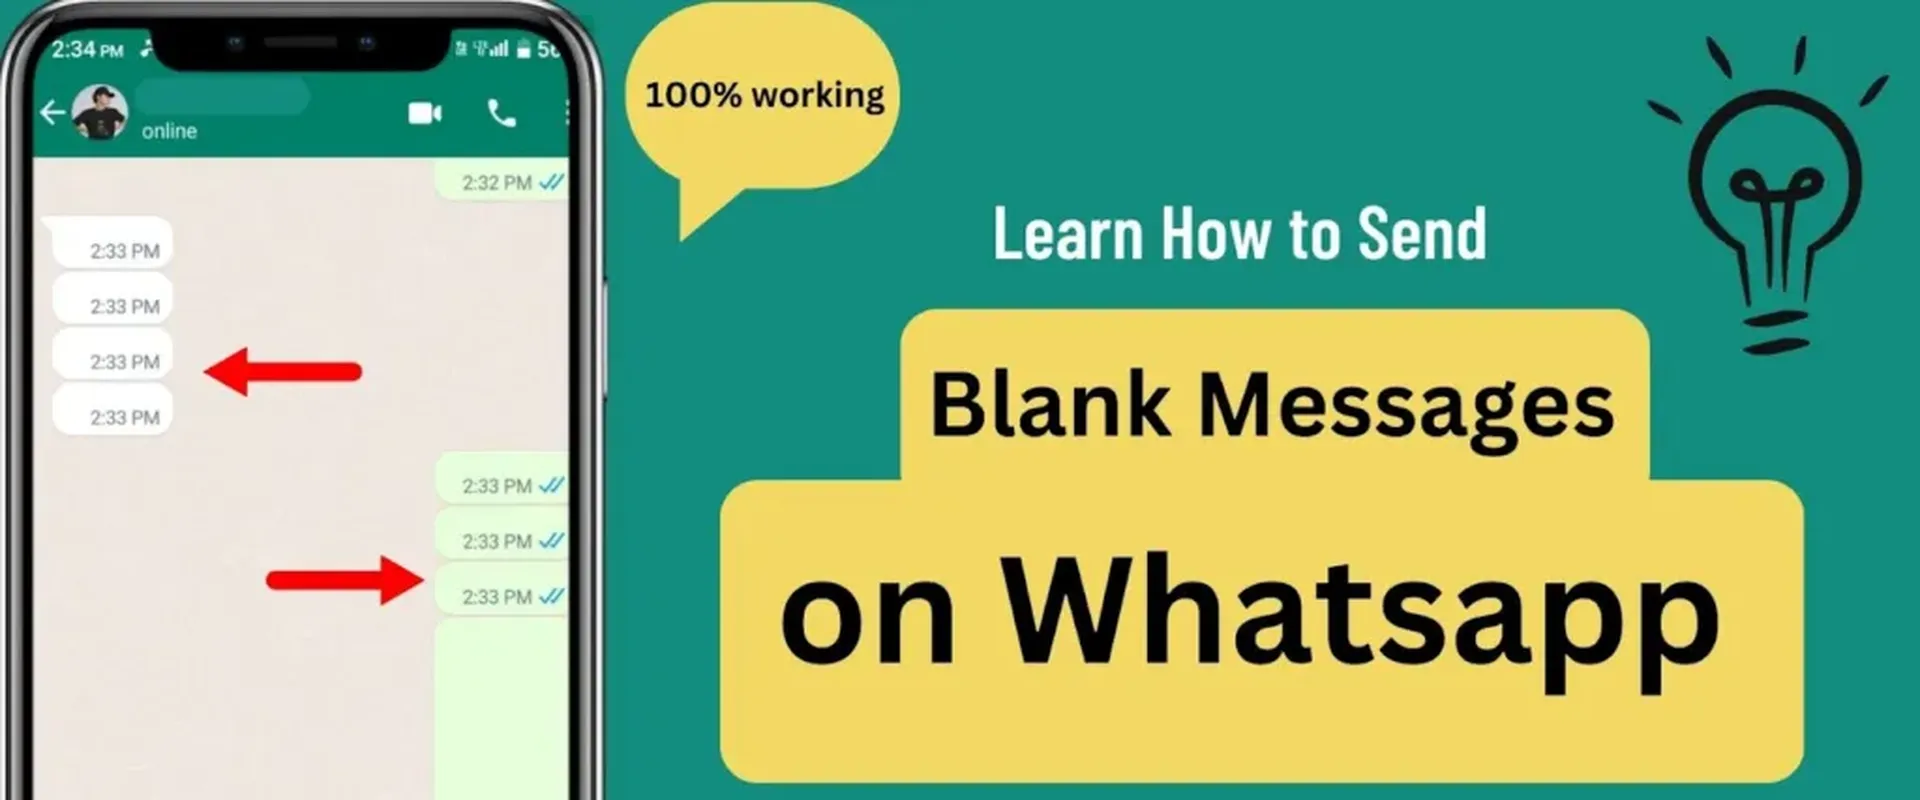 Learn How to Send Blank Messages on WhatsApp